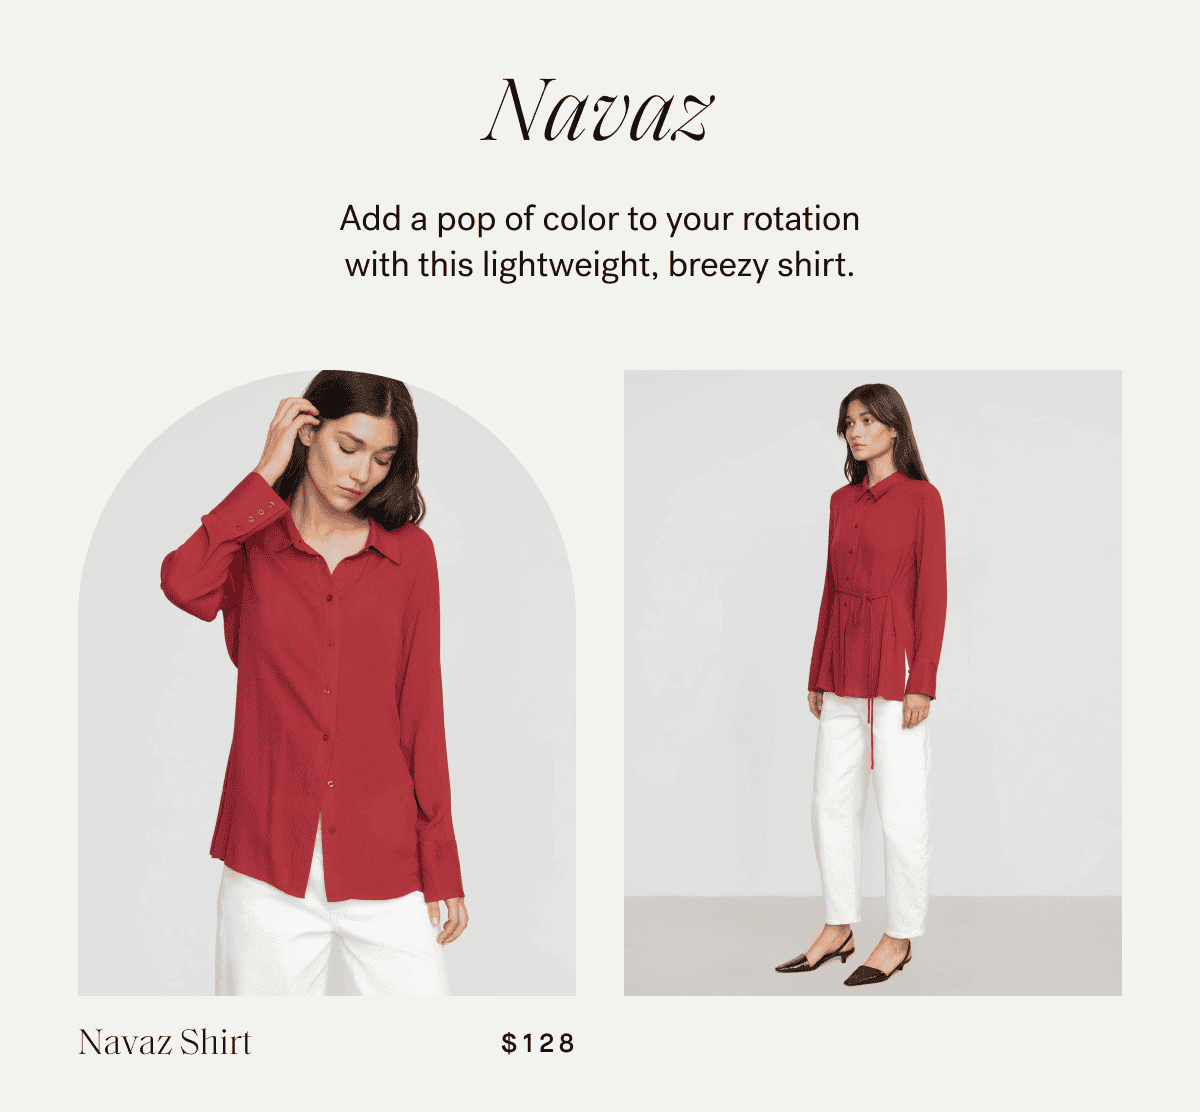 Navaz —\xa0Add a pop of color to your rotation with this lightweight, breezy shirt.